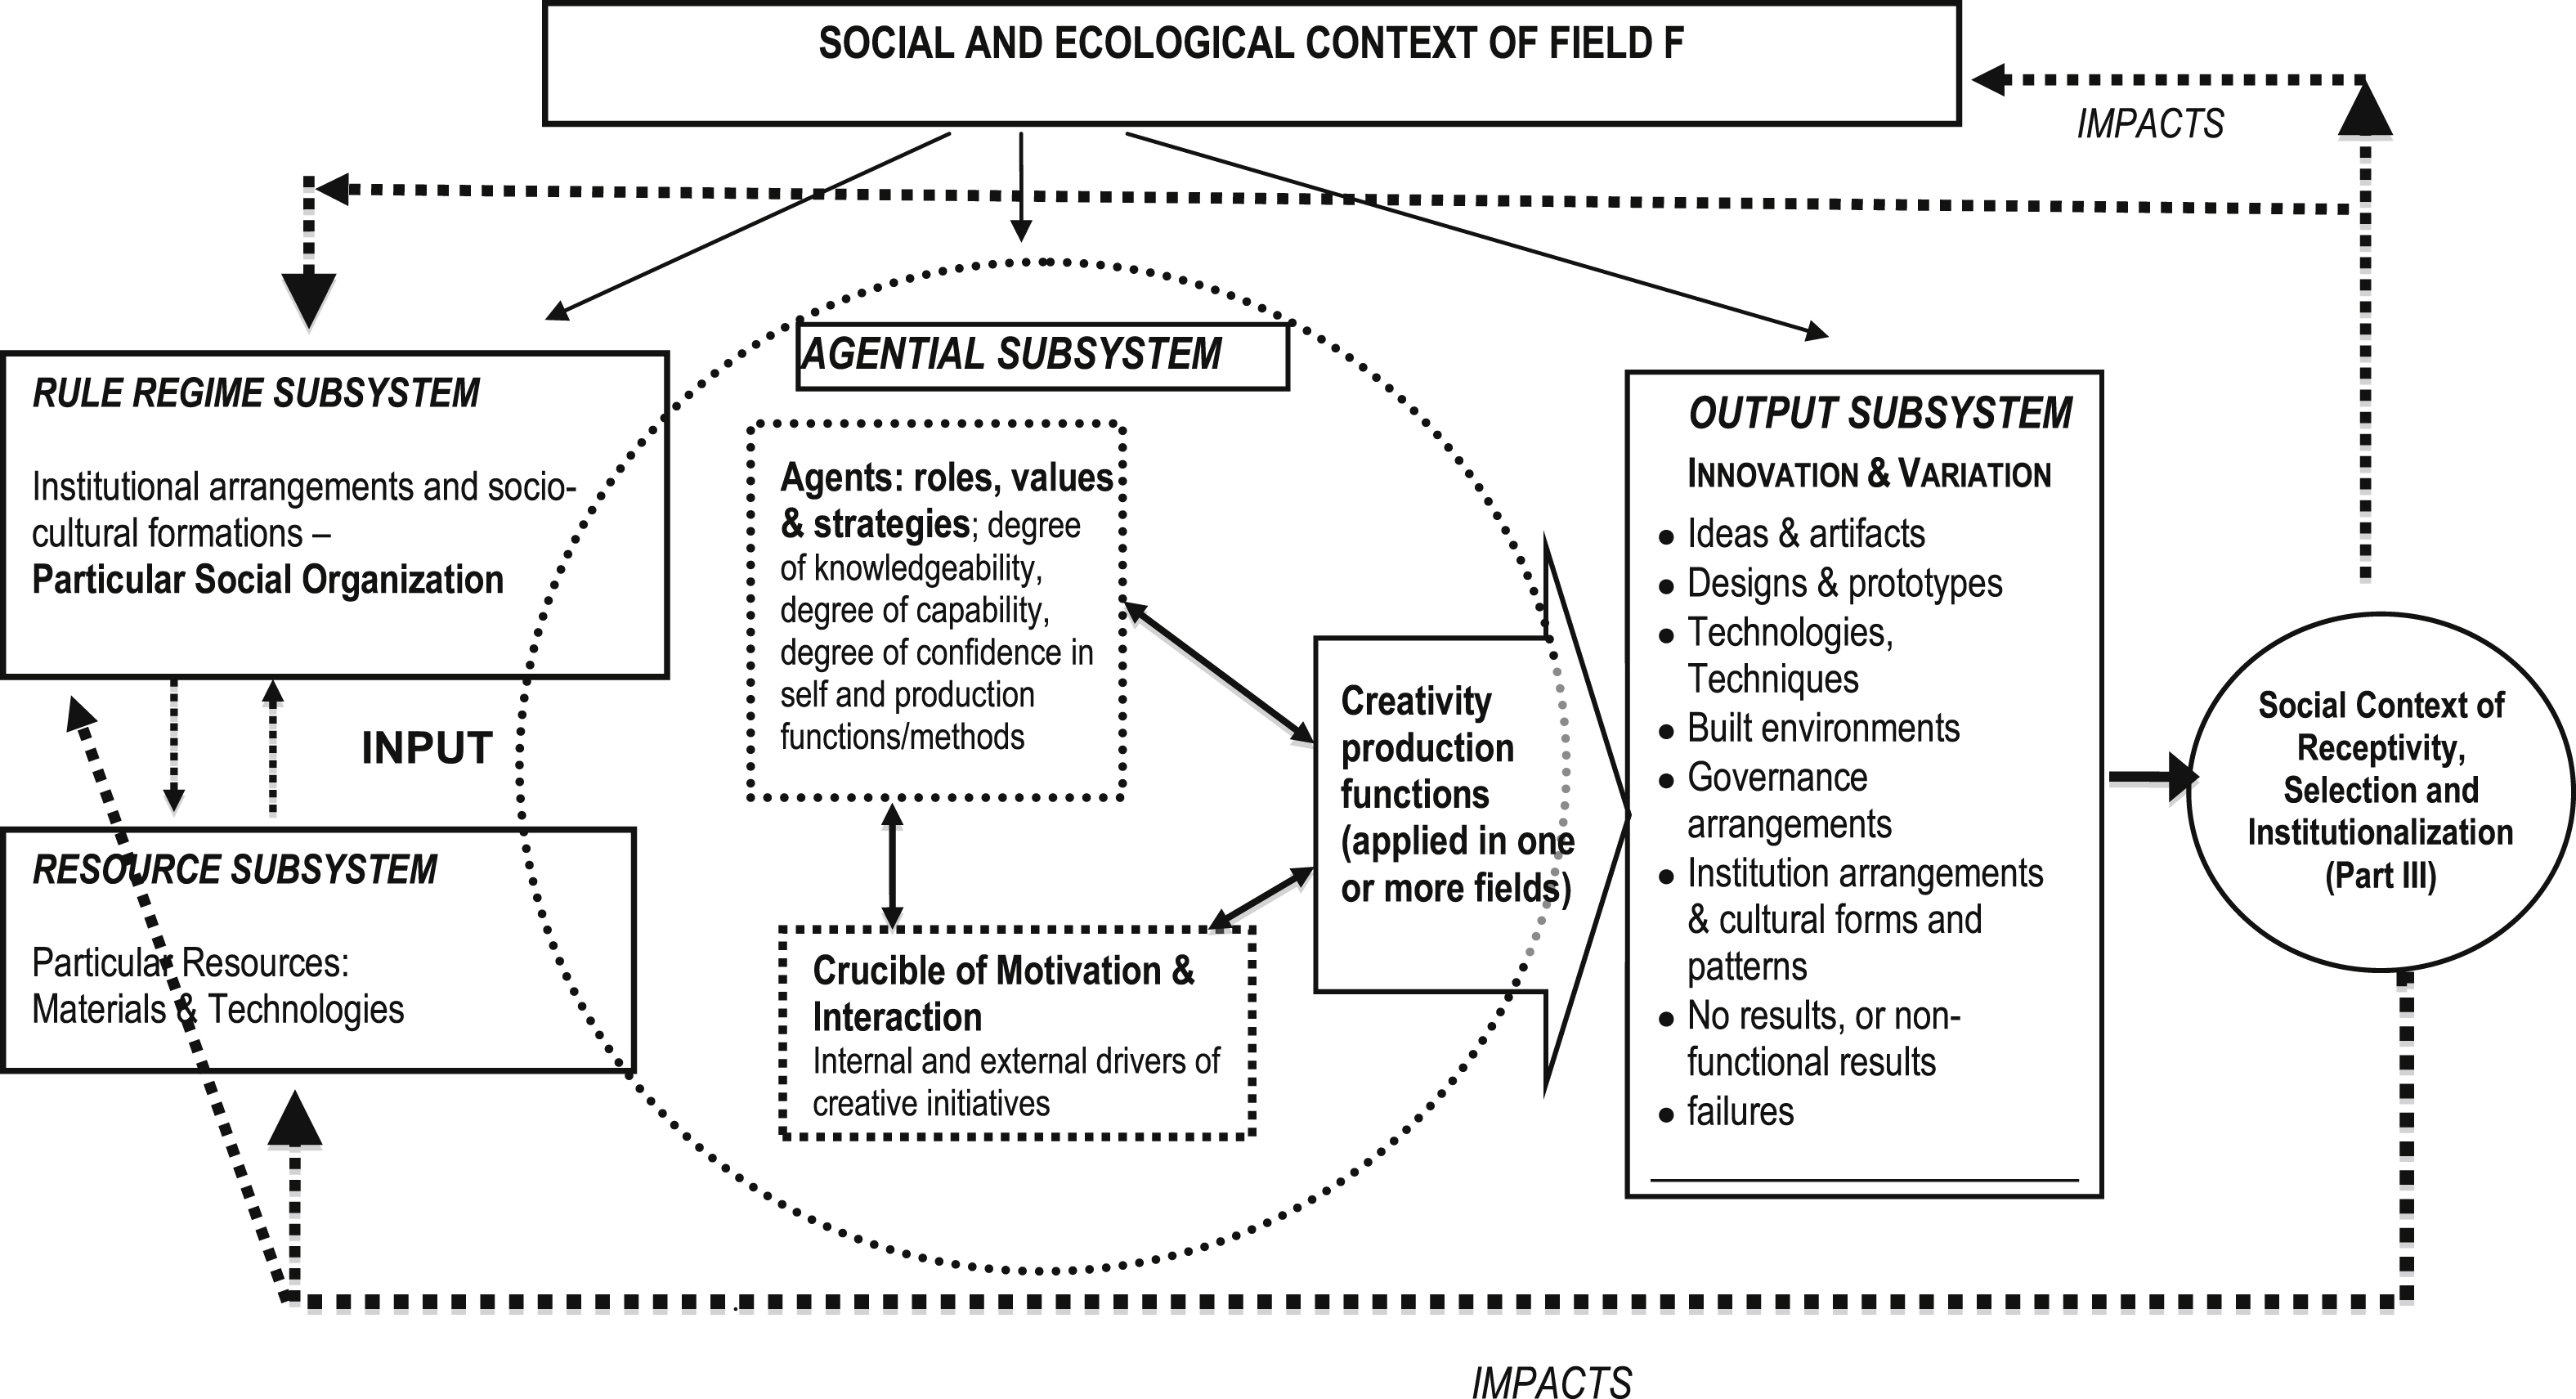 Model of Multiple Factors of Innovation and Creativity in a Social/Ecological Context
 (Legal, State Regulation, Markets, Socio-technical Systems and Infrastructures (see Fig. 1, Part I).